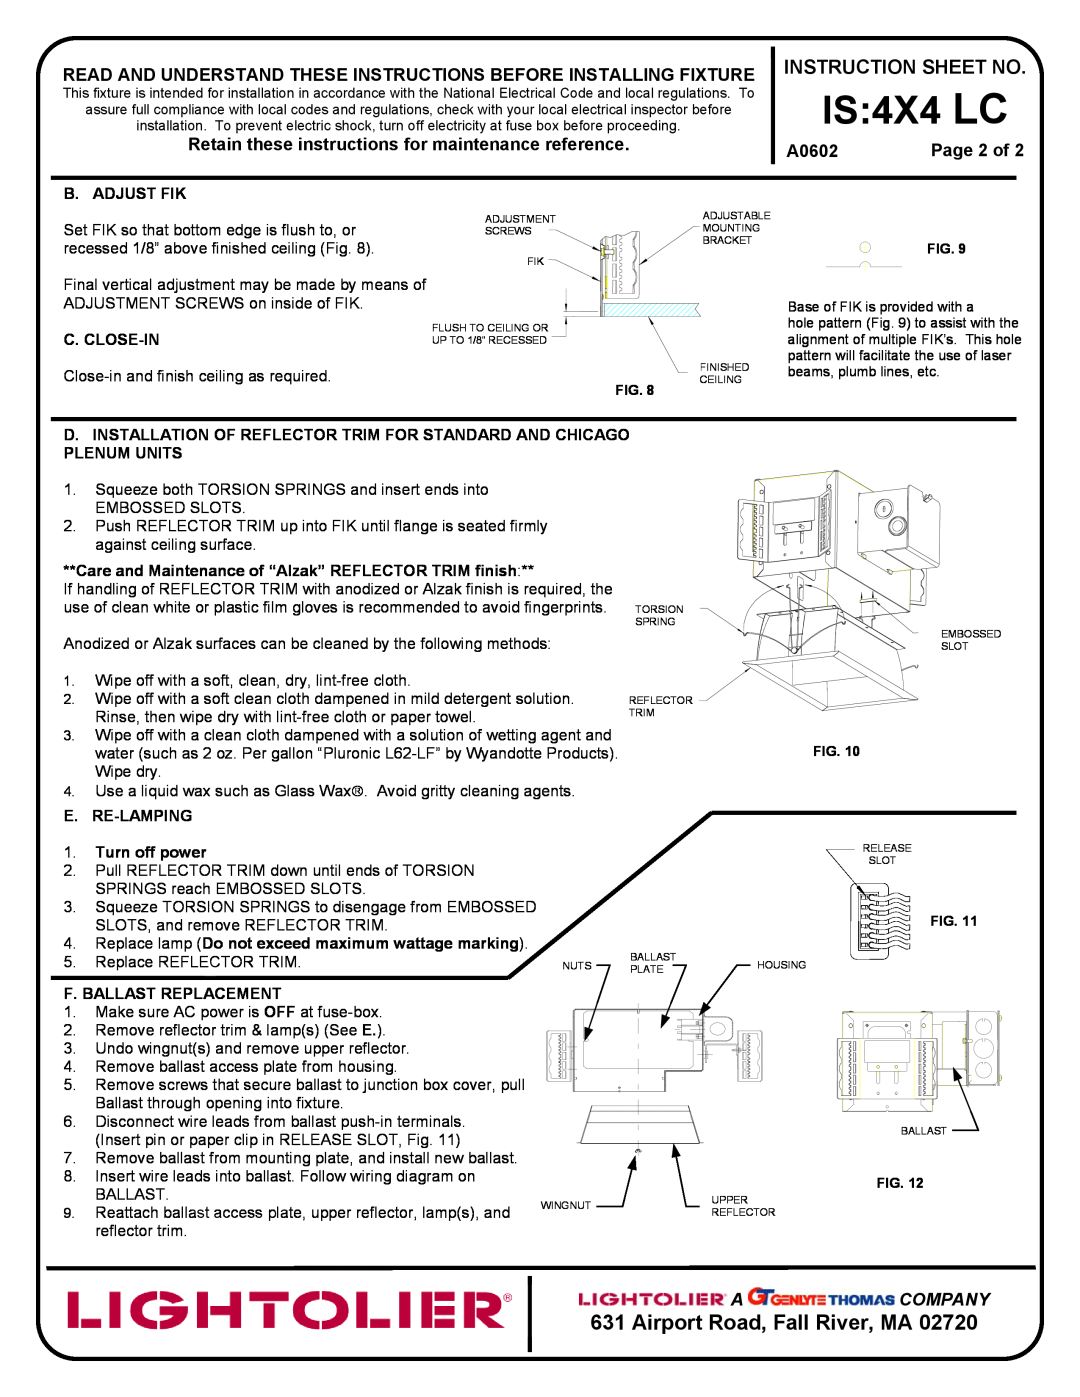 Lightolier IS:4X4LC Page 2 of, Company, IS 4X4 LC, Airport Road, Fall River, MA, Instruction Sheet No, A0602 